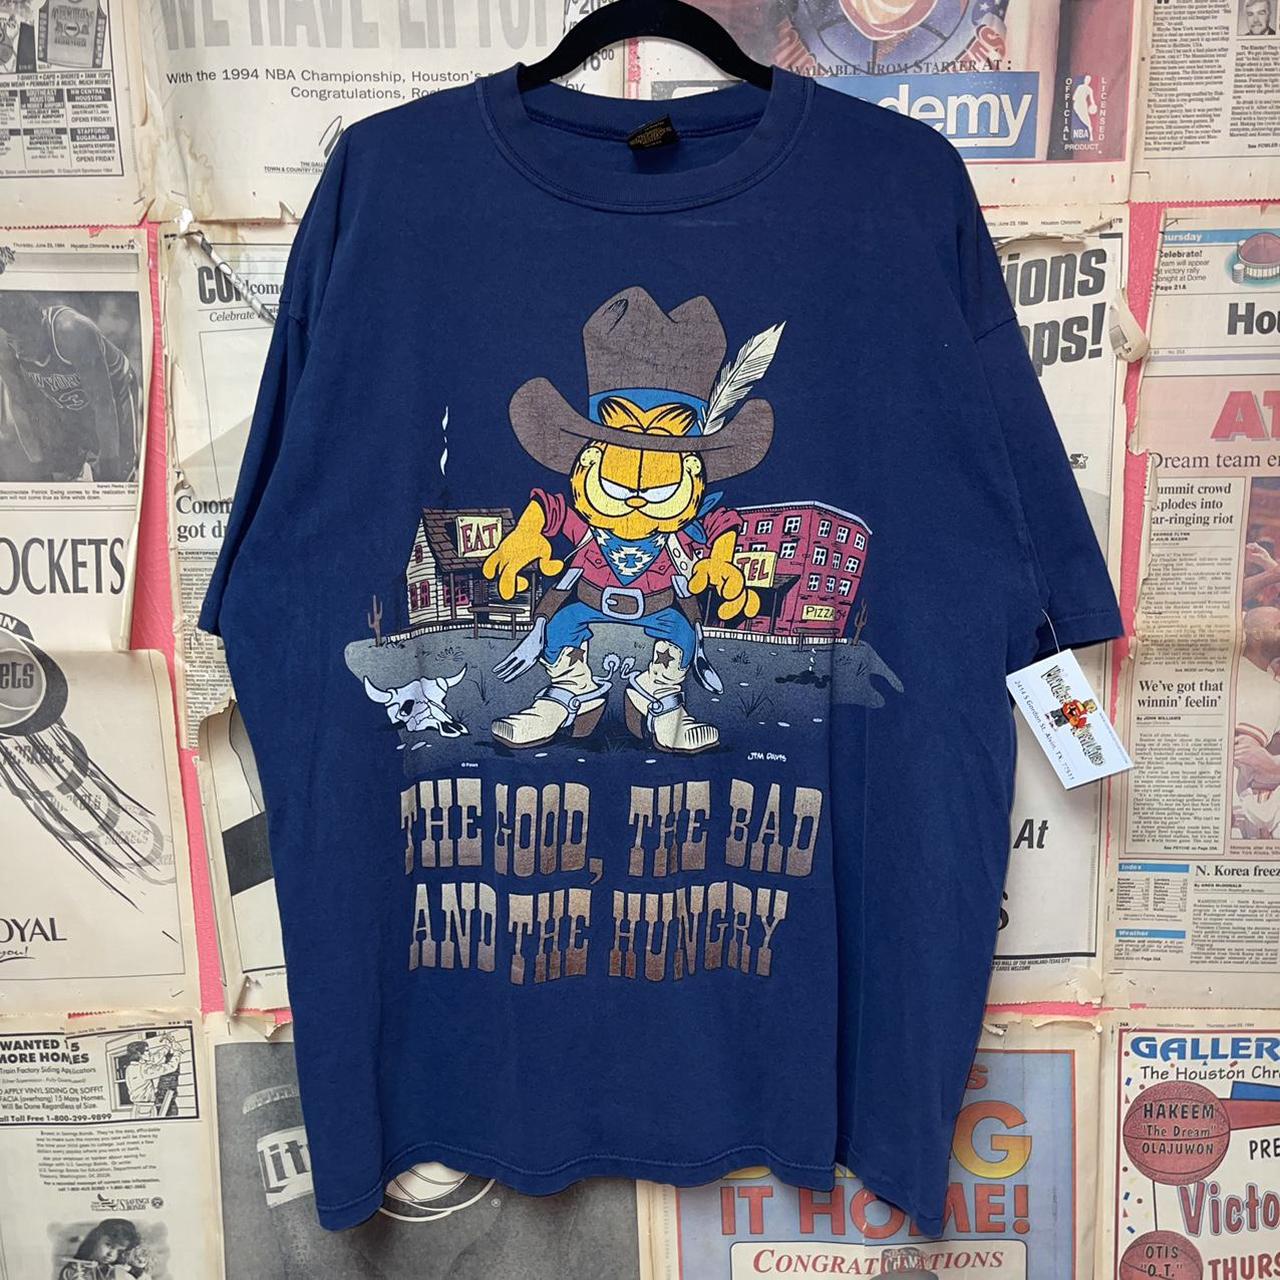 Product Image 1 - Vintage Vtg 90s Garfield T